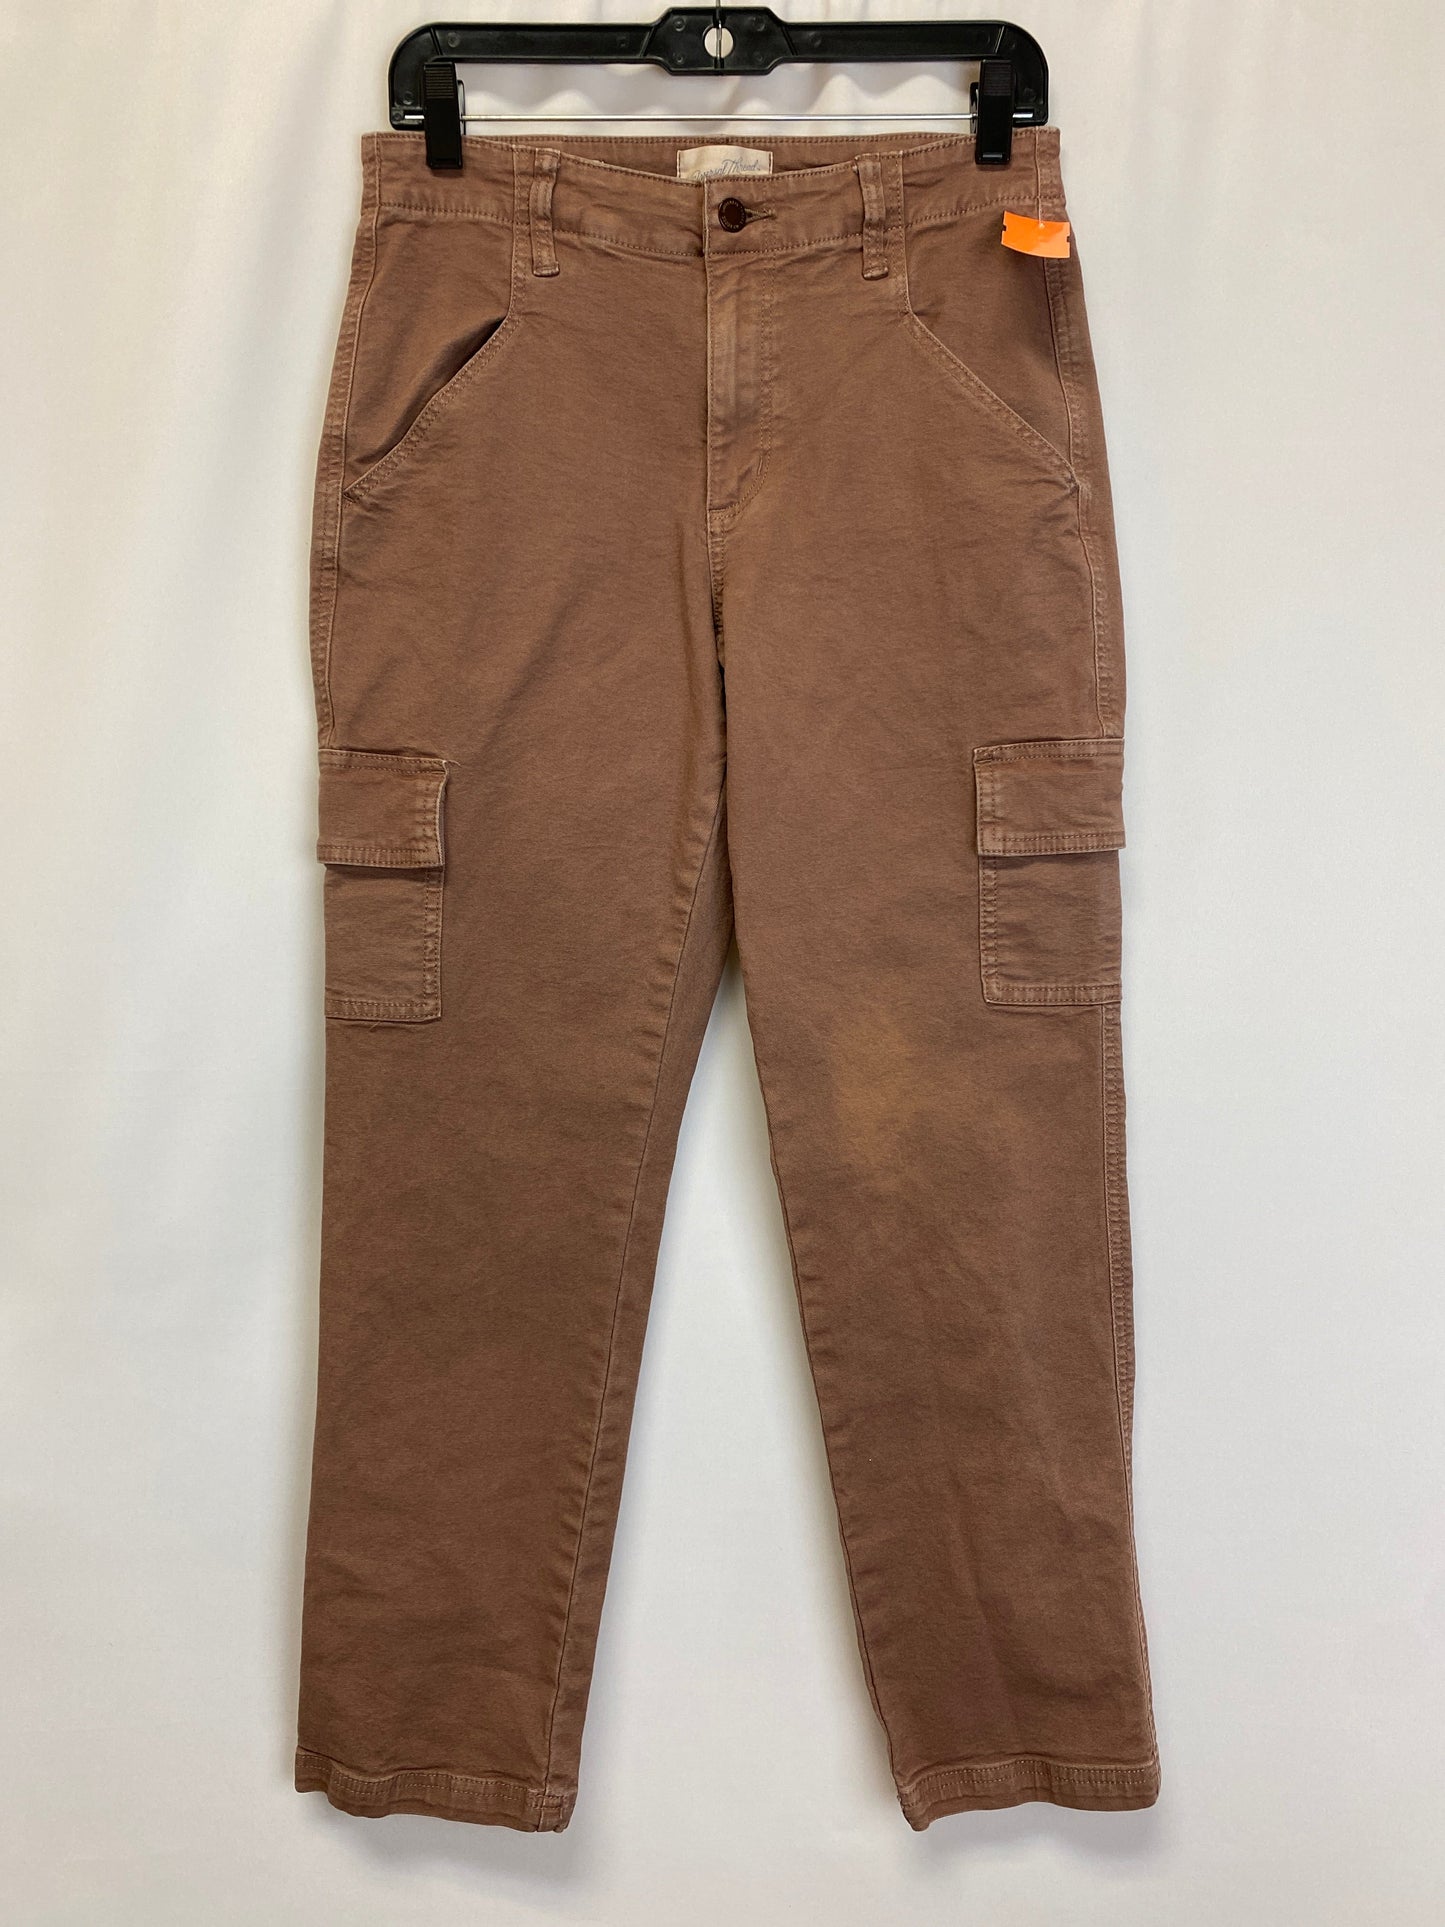 Pants Cargo & Utility By Universal Thread  Size: 6